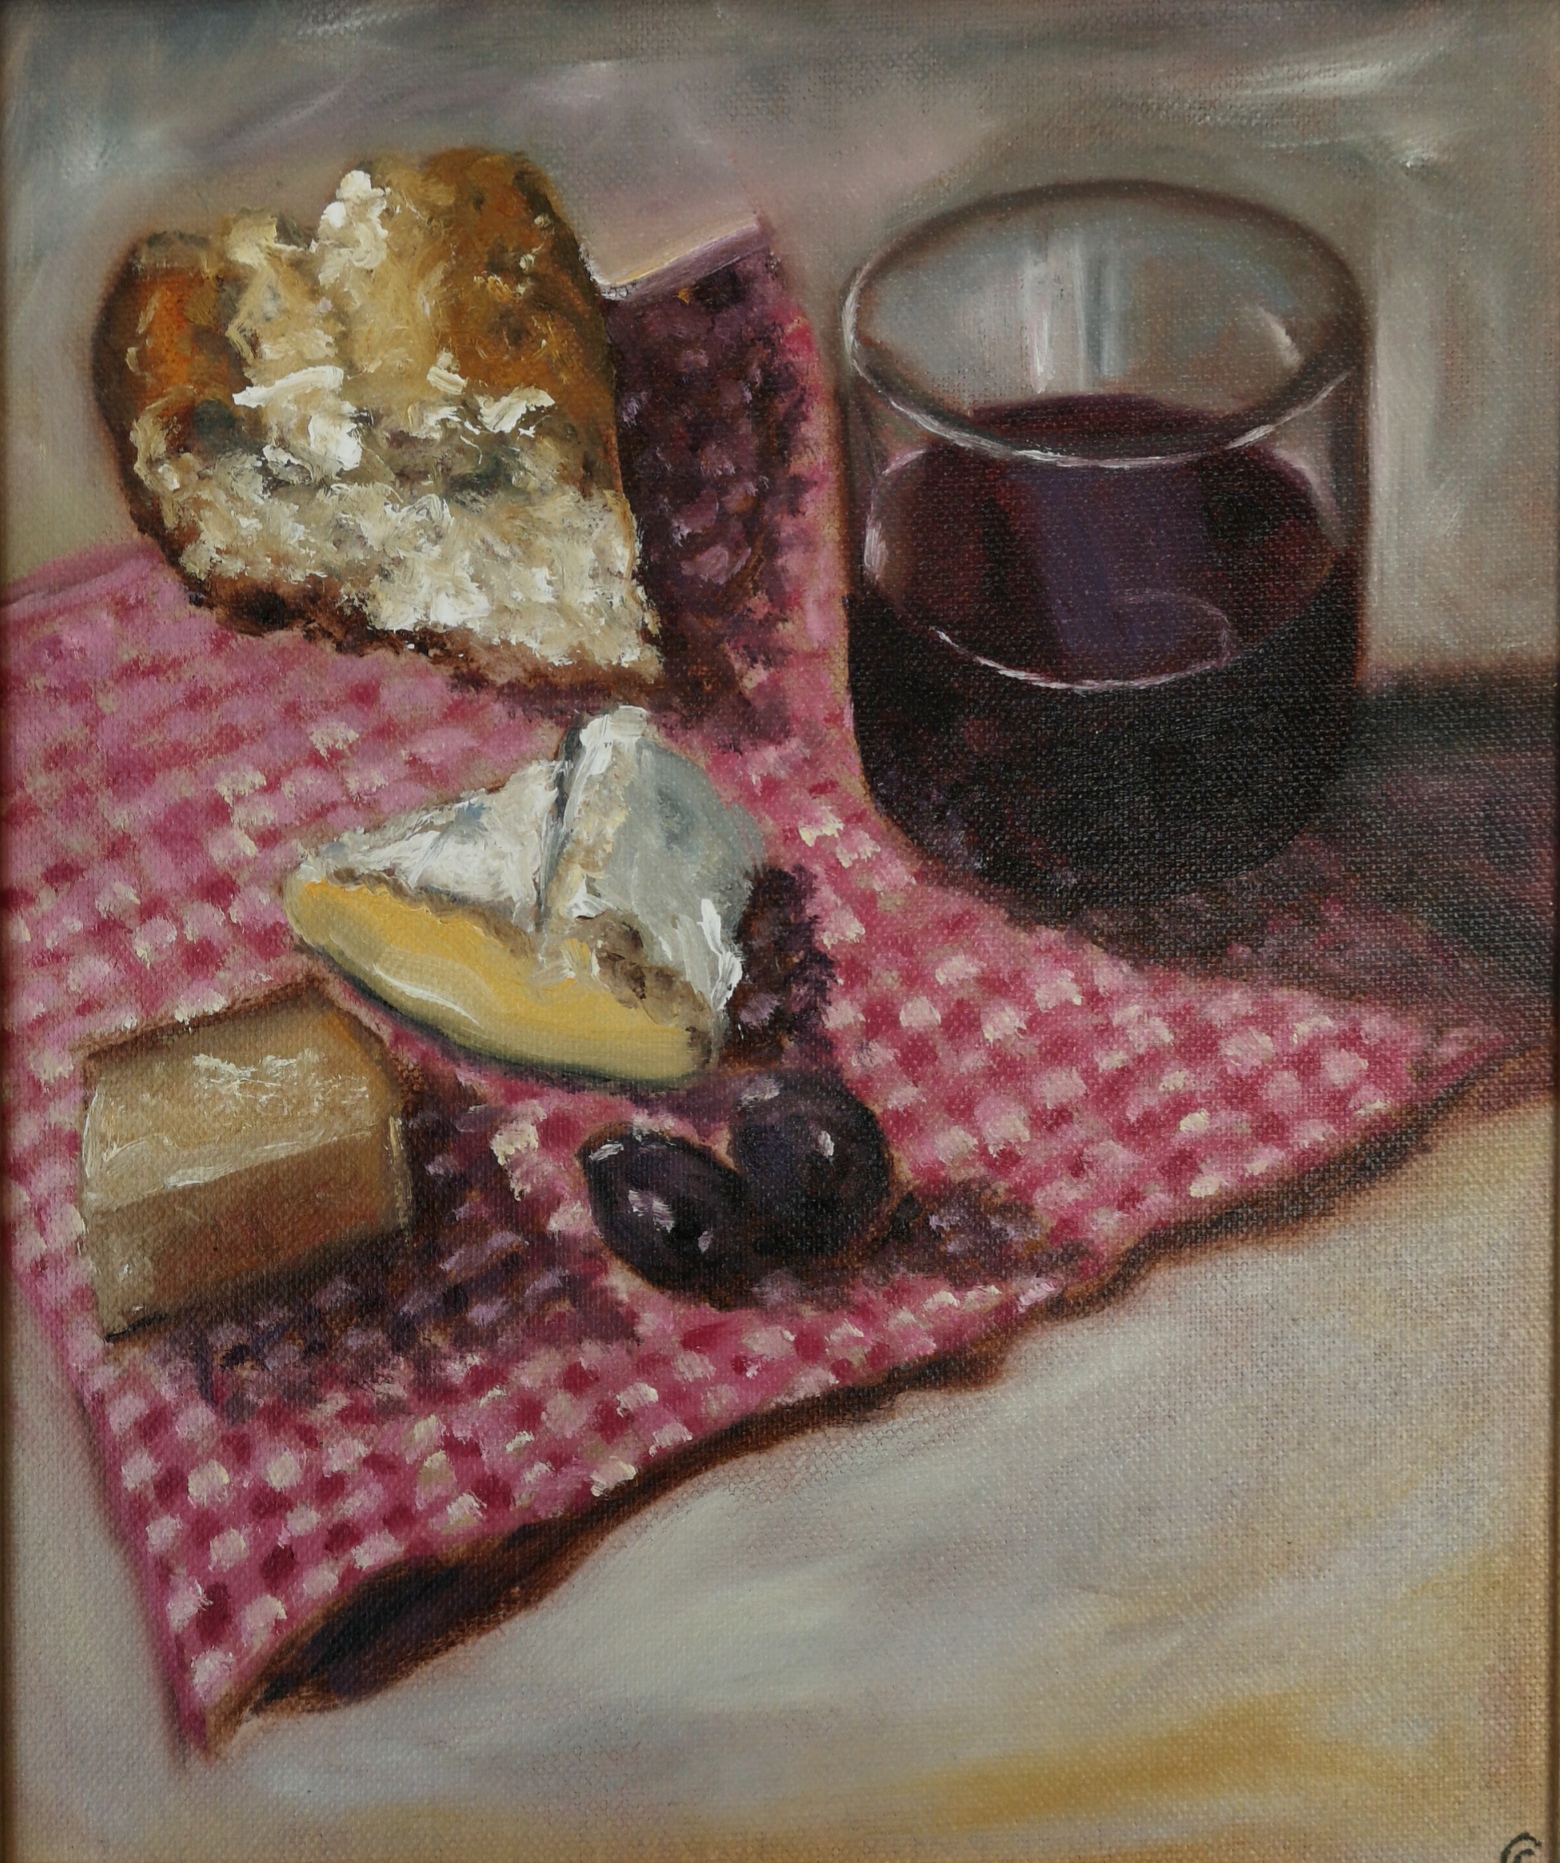 Cheese & Wine Time